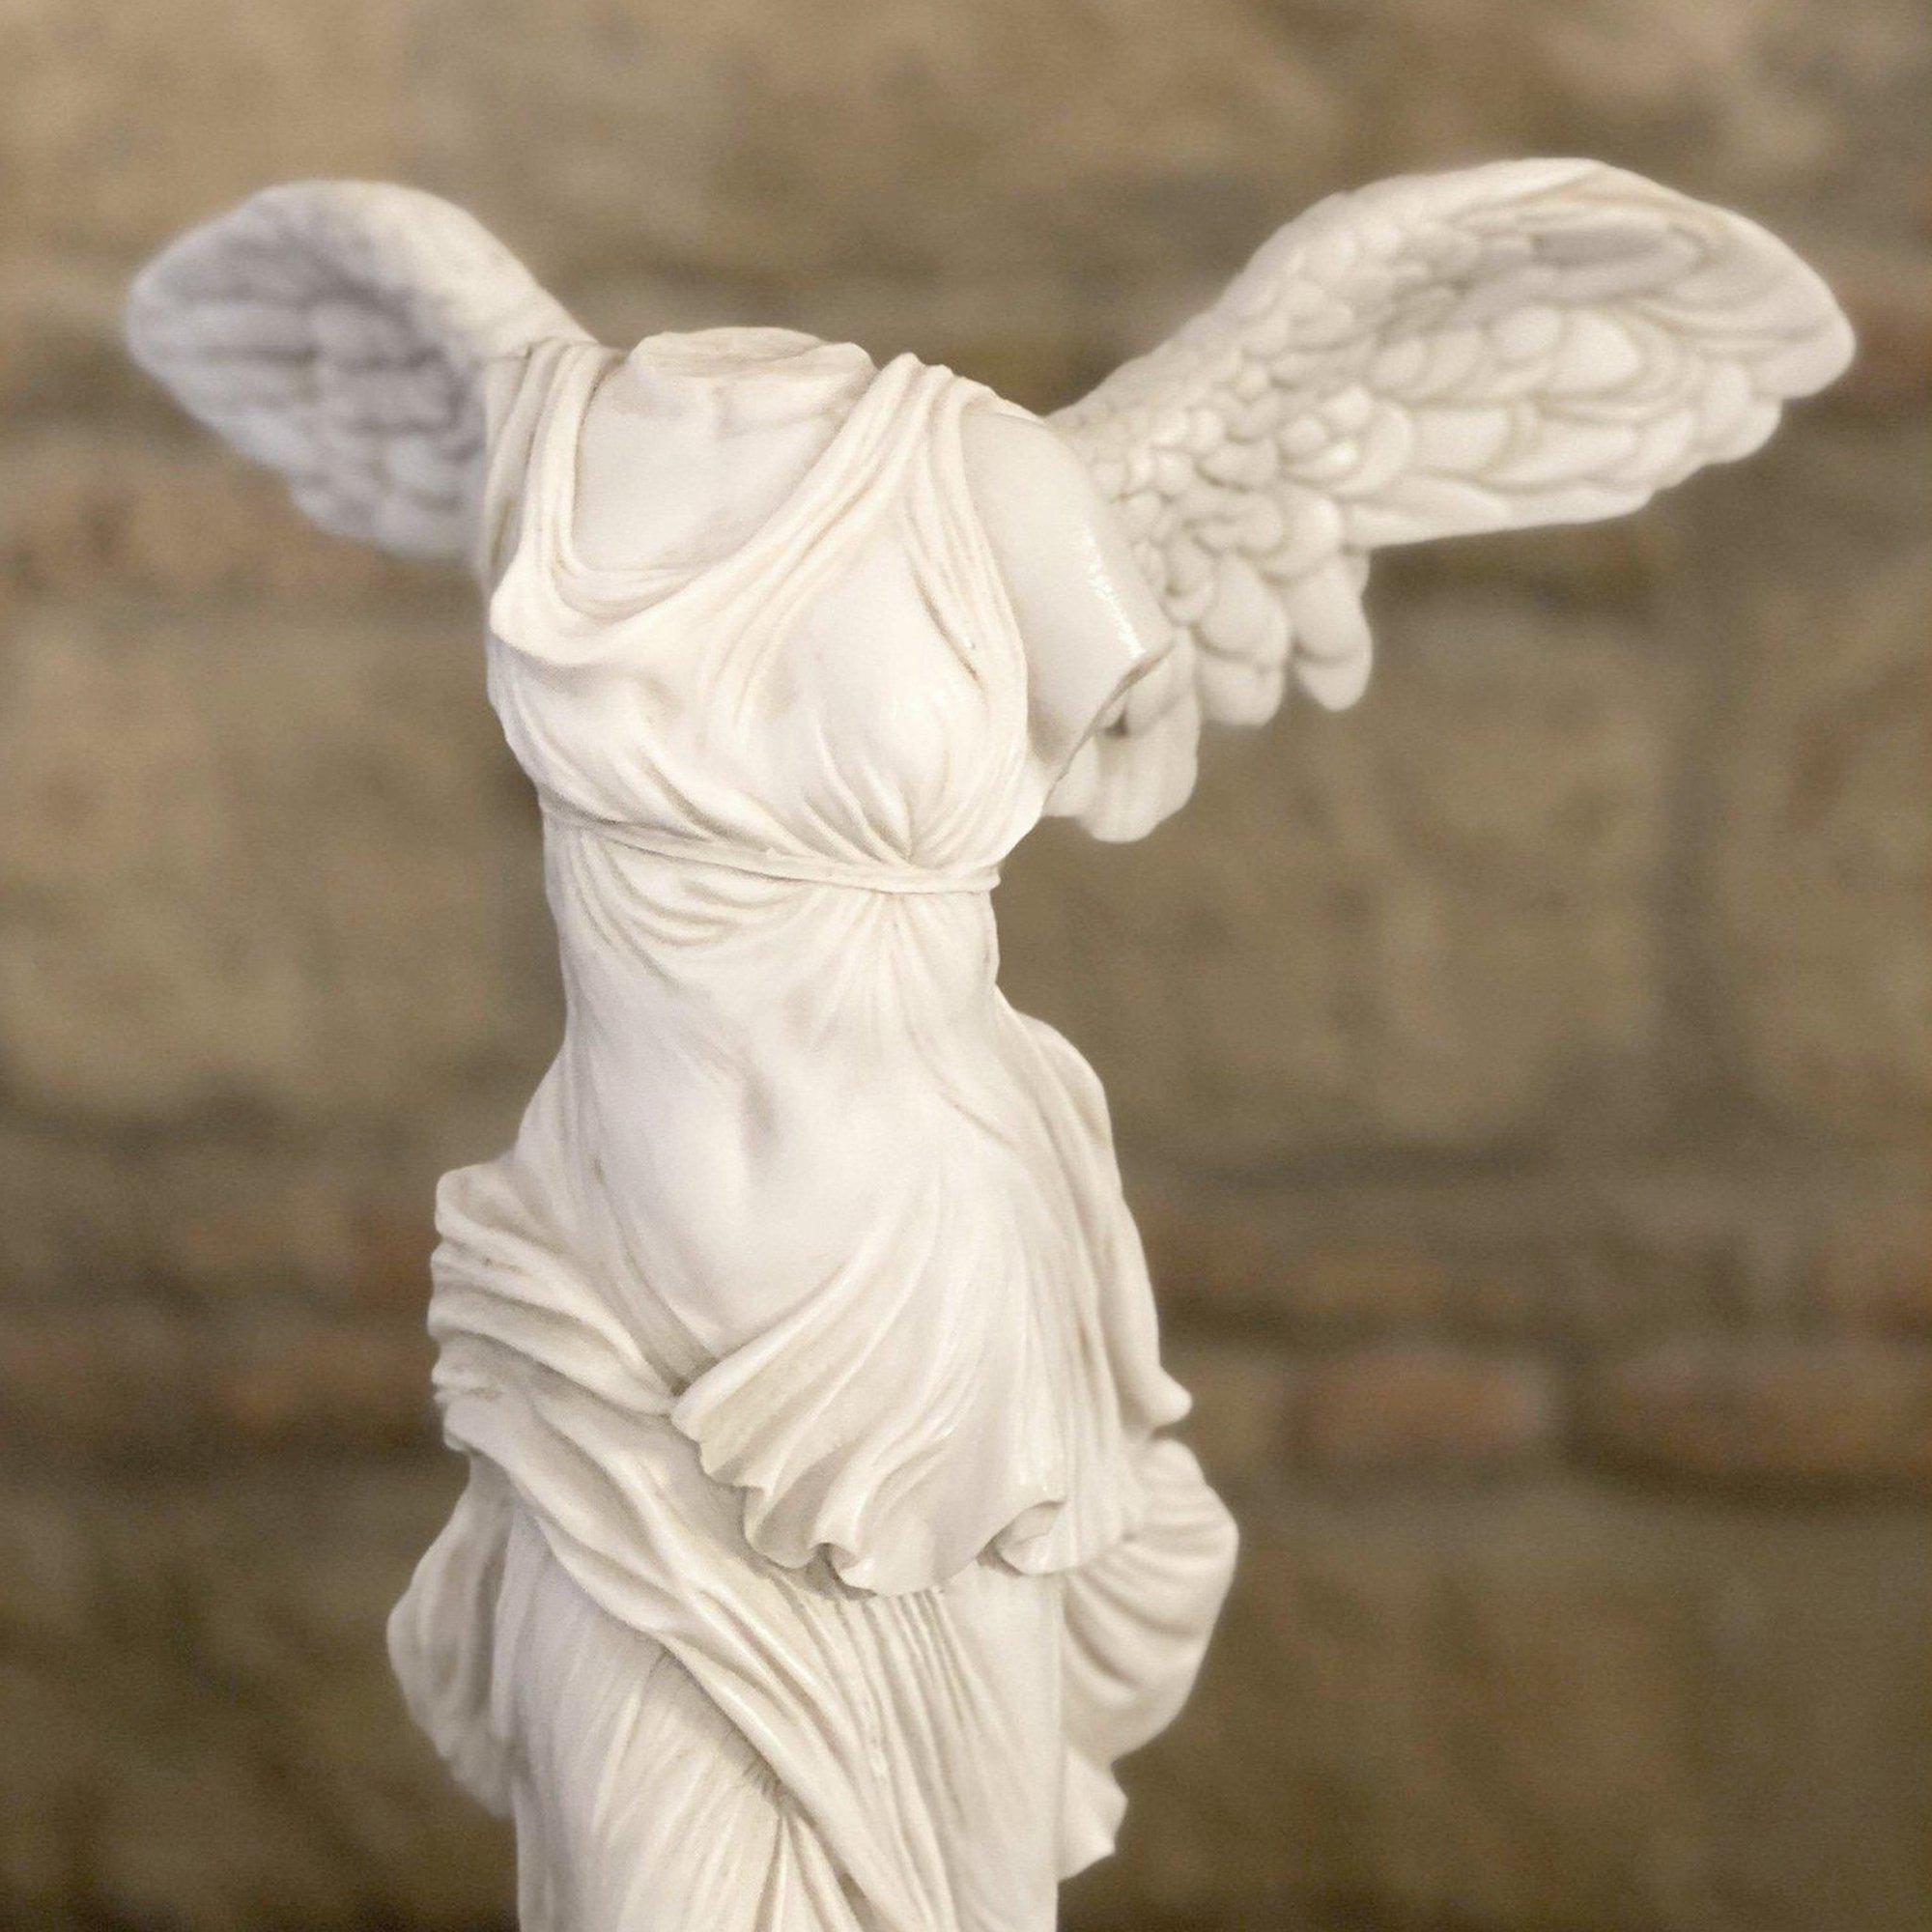 Nike Samothrace Winged Victory marble statue for sale